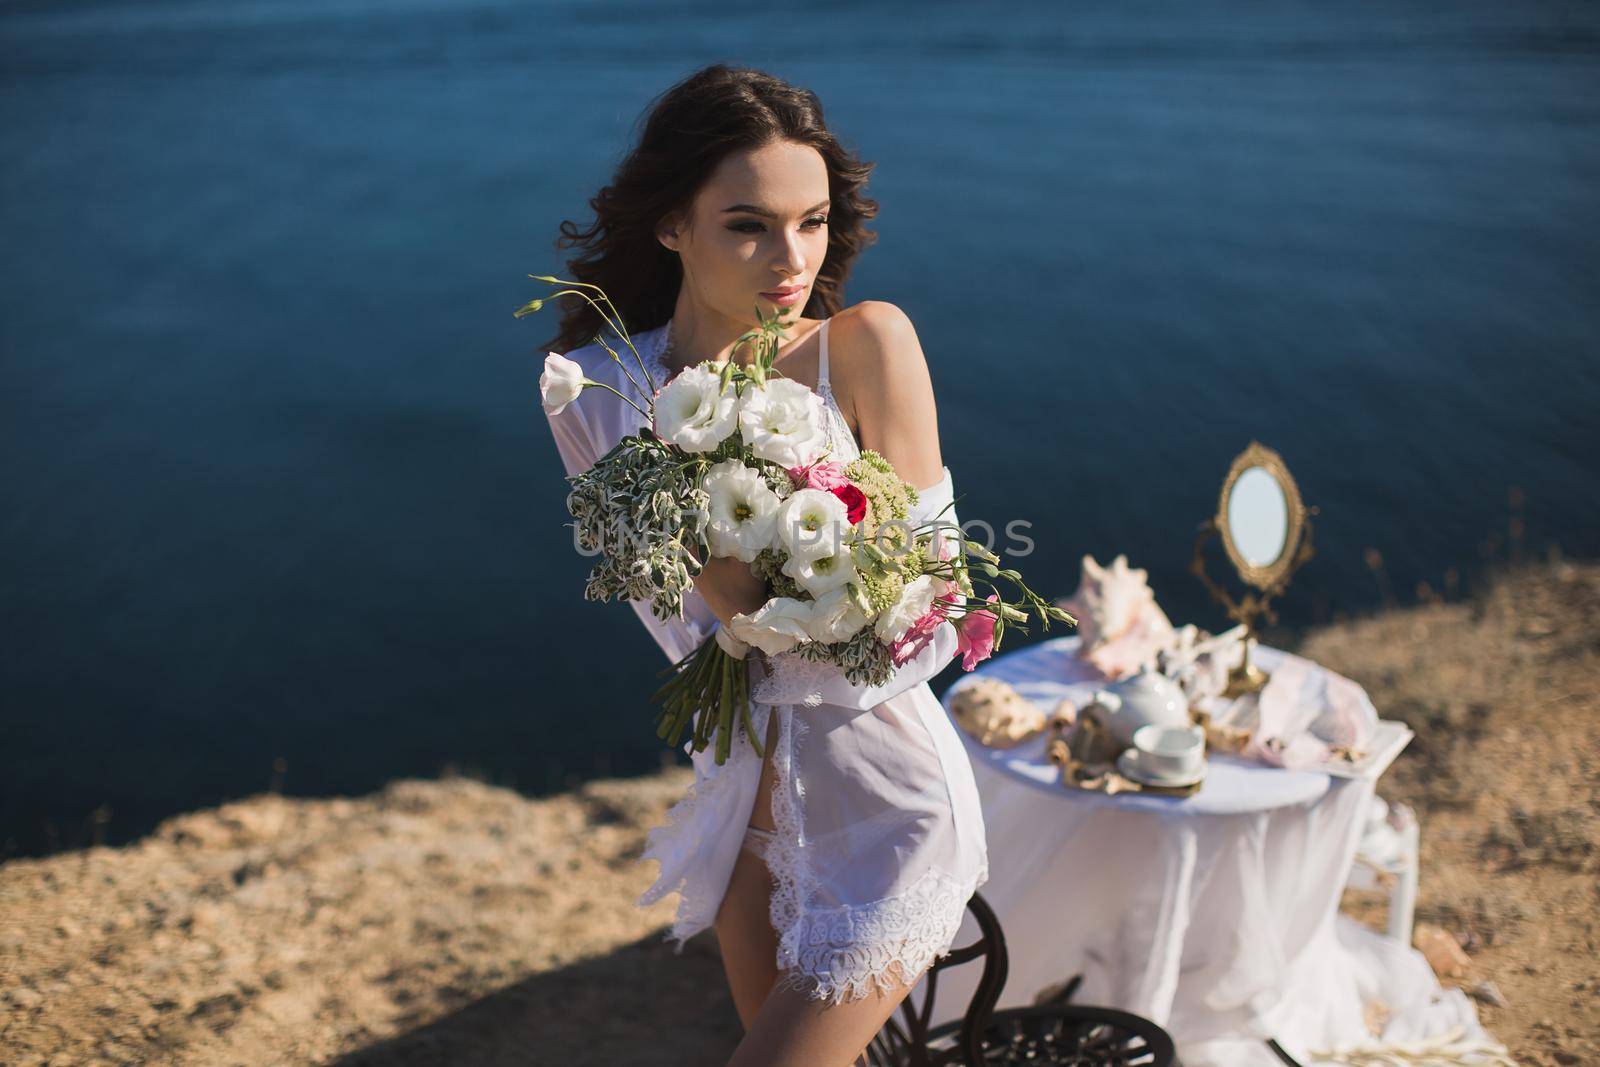 Bride in lingerie. Holds the Bridal bouquet . Charges of the bride, bride's morning.